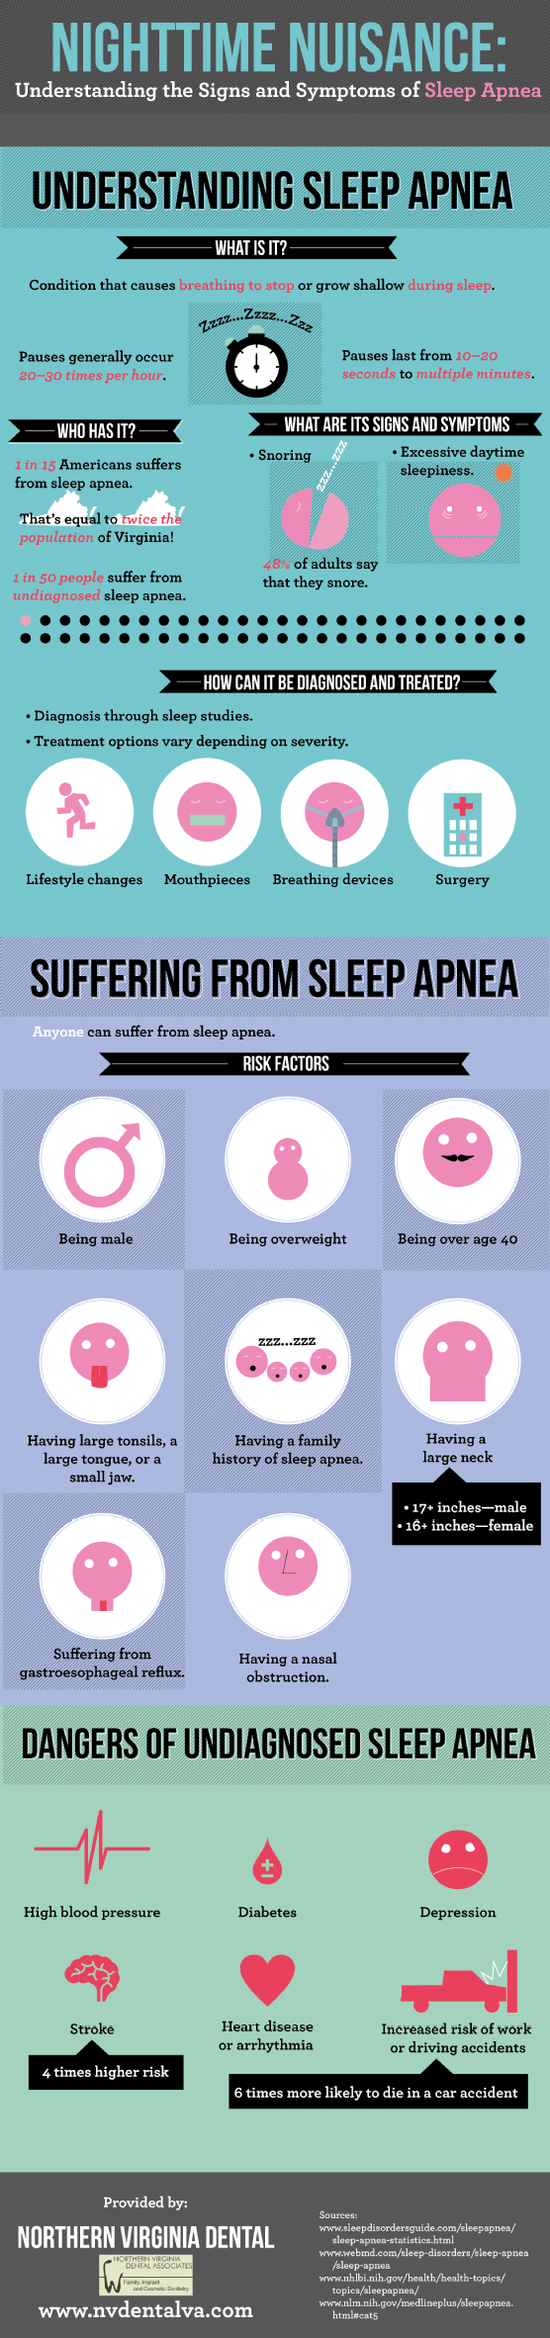 Does anyone in your family suffer from sleep apnea? If so ...